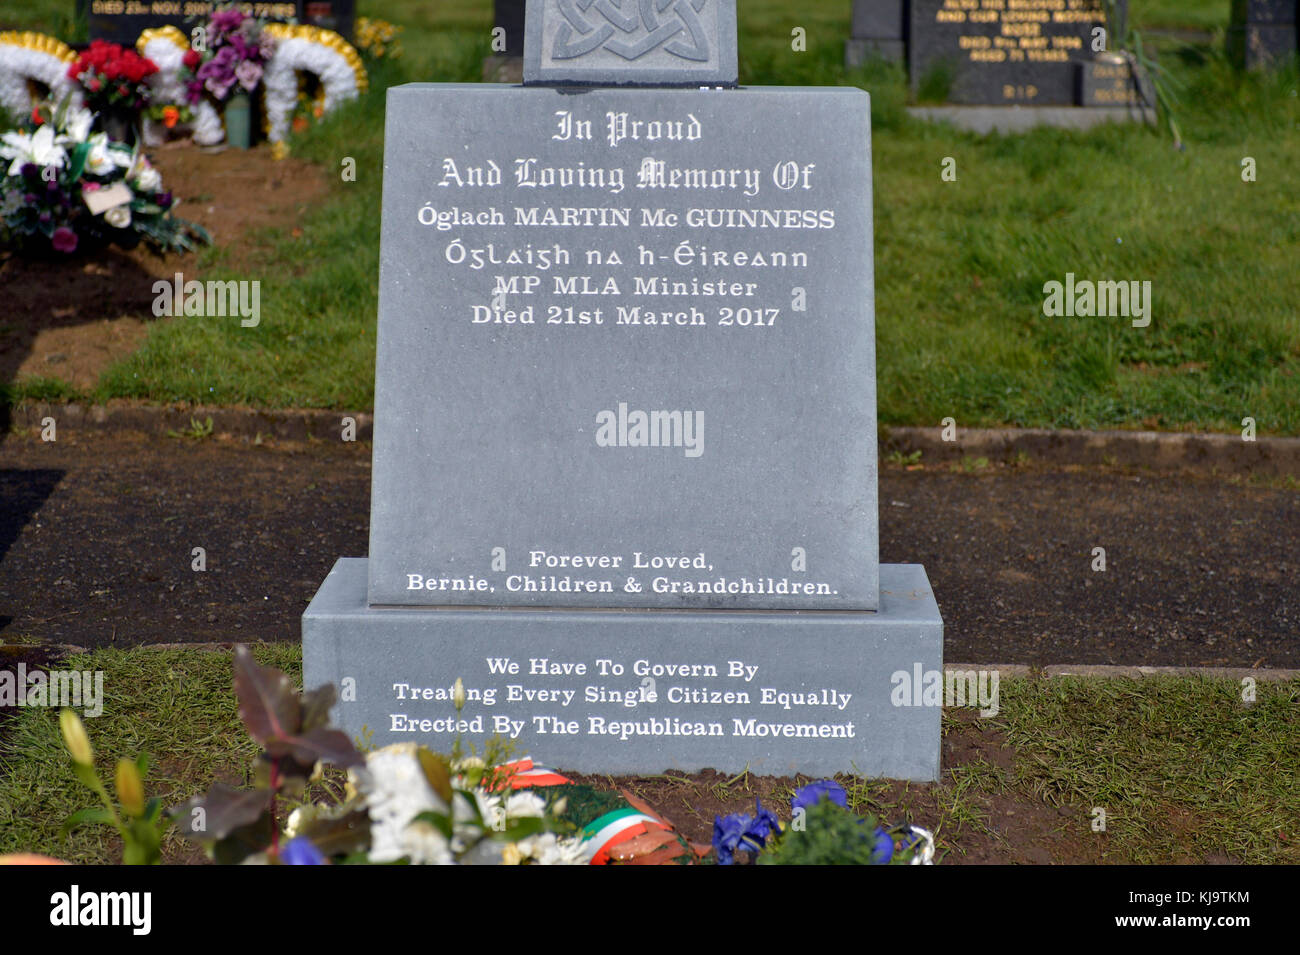 Headstone on grave of Martin McGuinnes at the Republican Plot in the City Cemetery, Derry, Londonderry, Northern Ireland. ©George Sweeney / Alamy Stock Photo